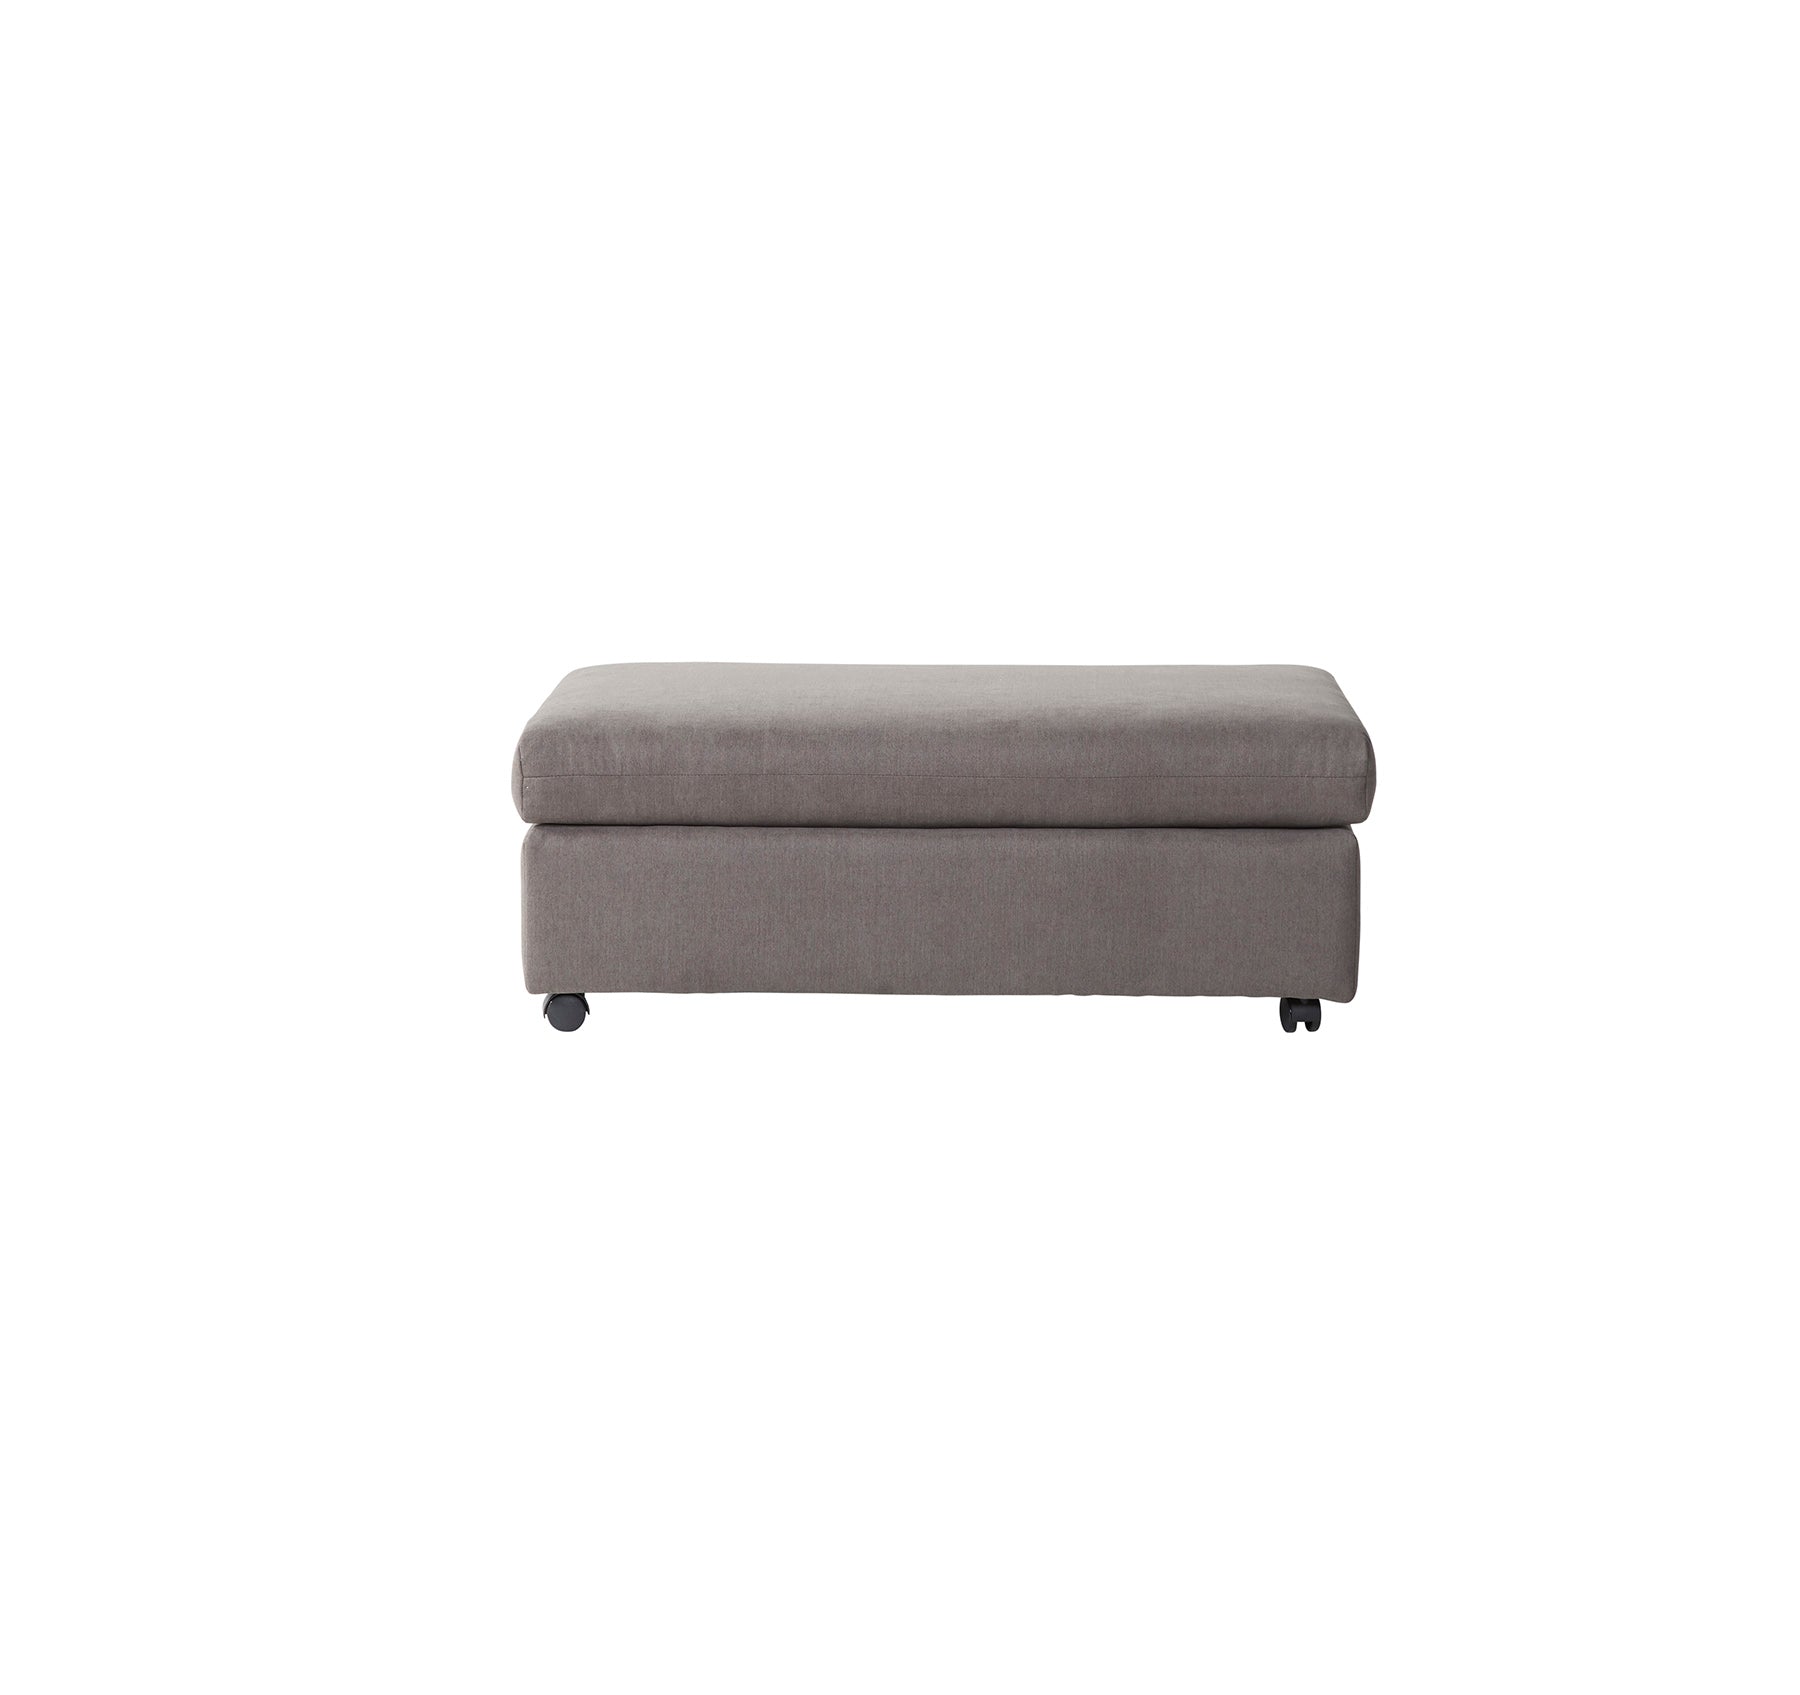 Image Carbon 18200 Sofa With Cuddle Chair Hughes Furniture